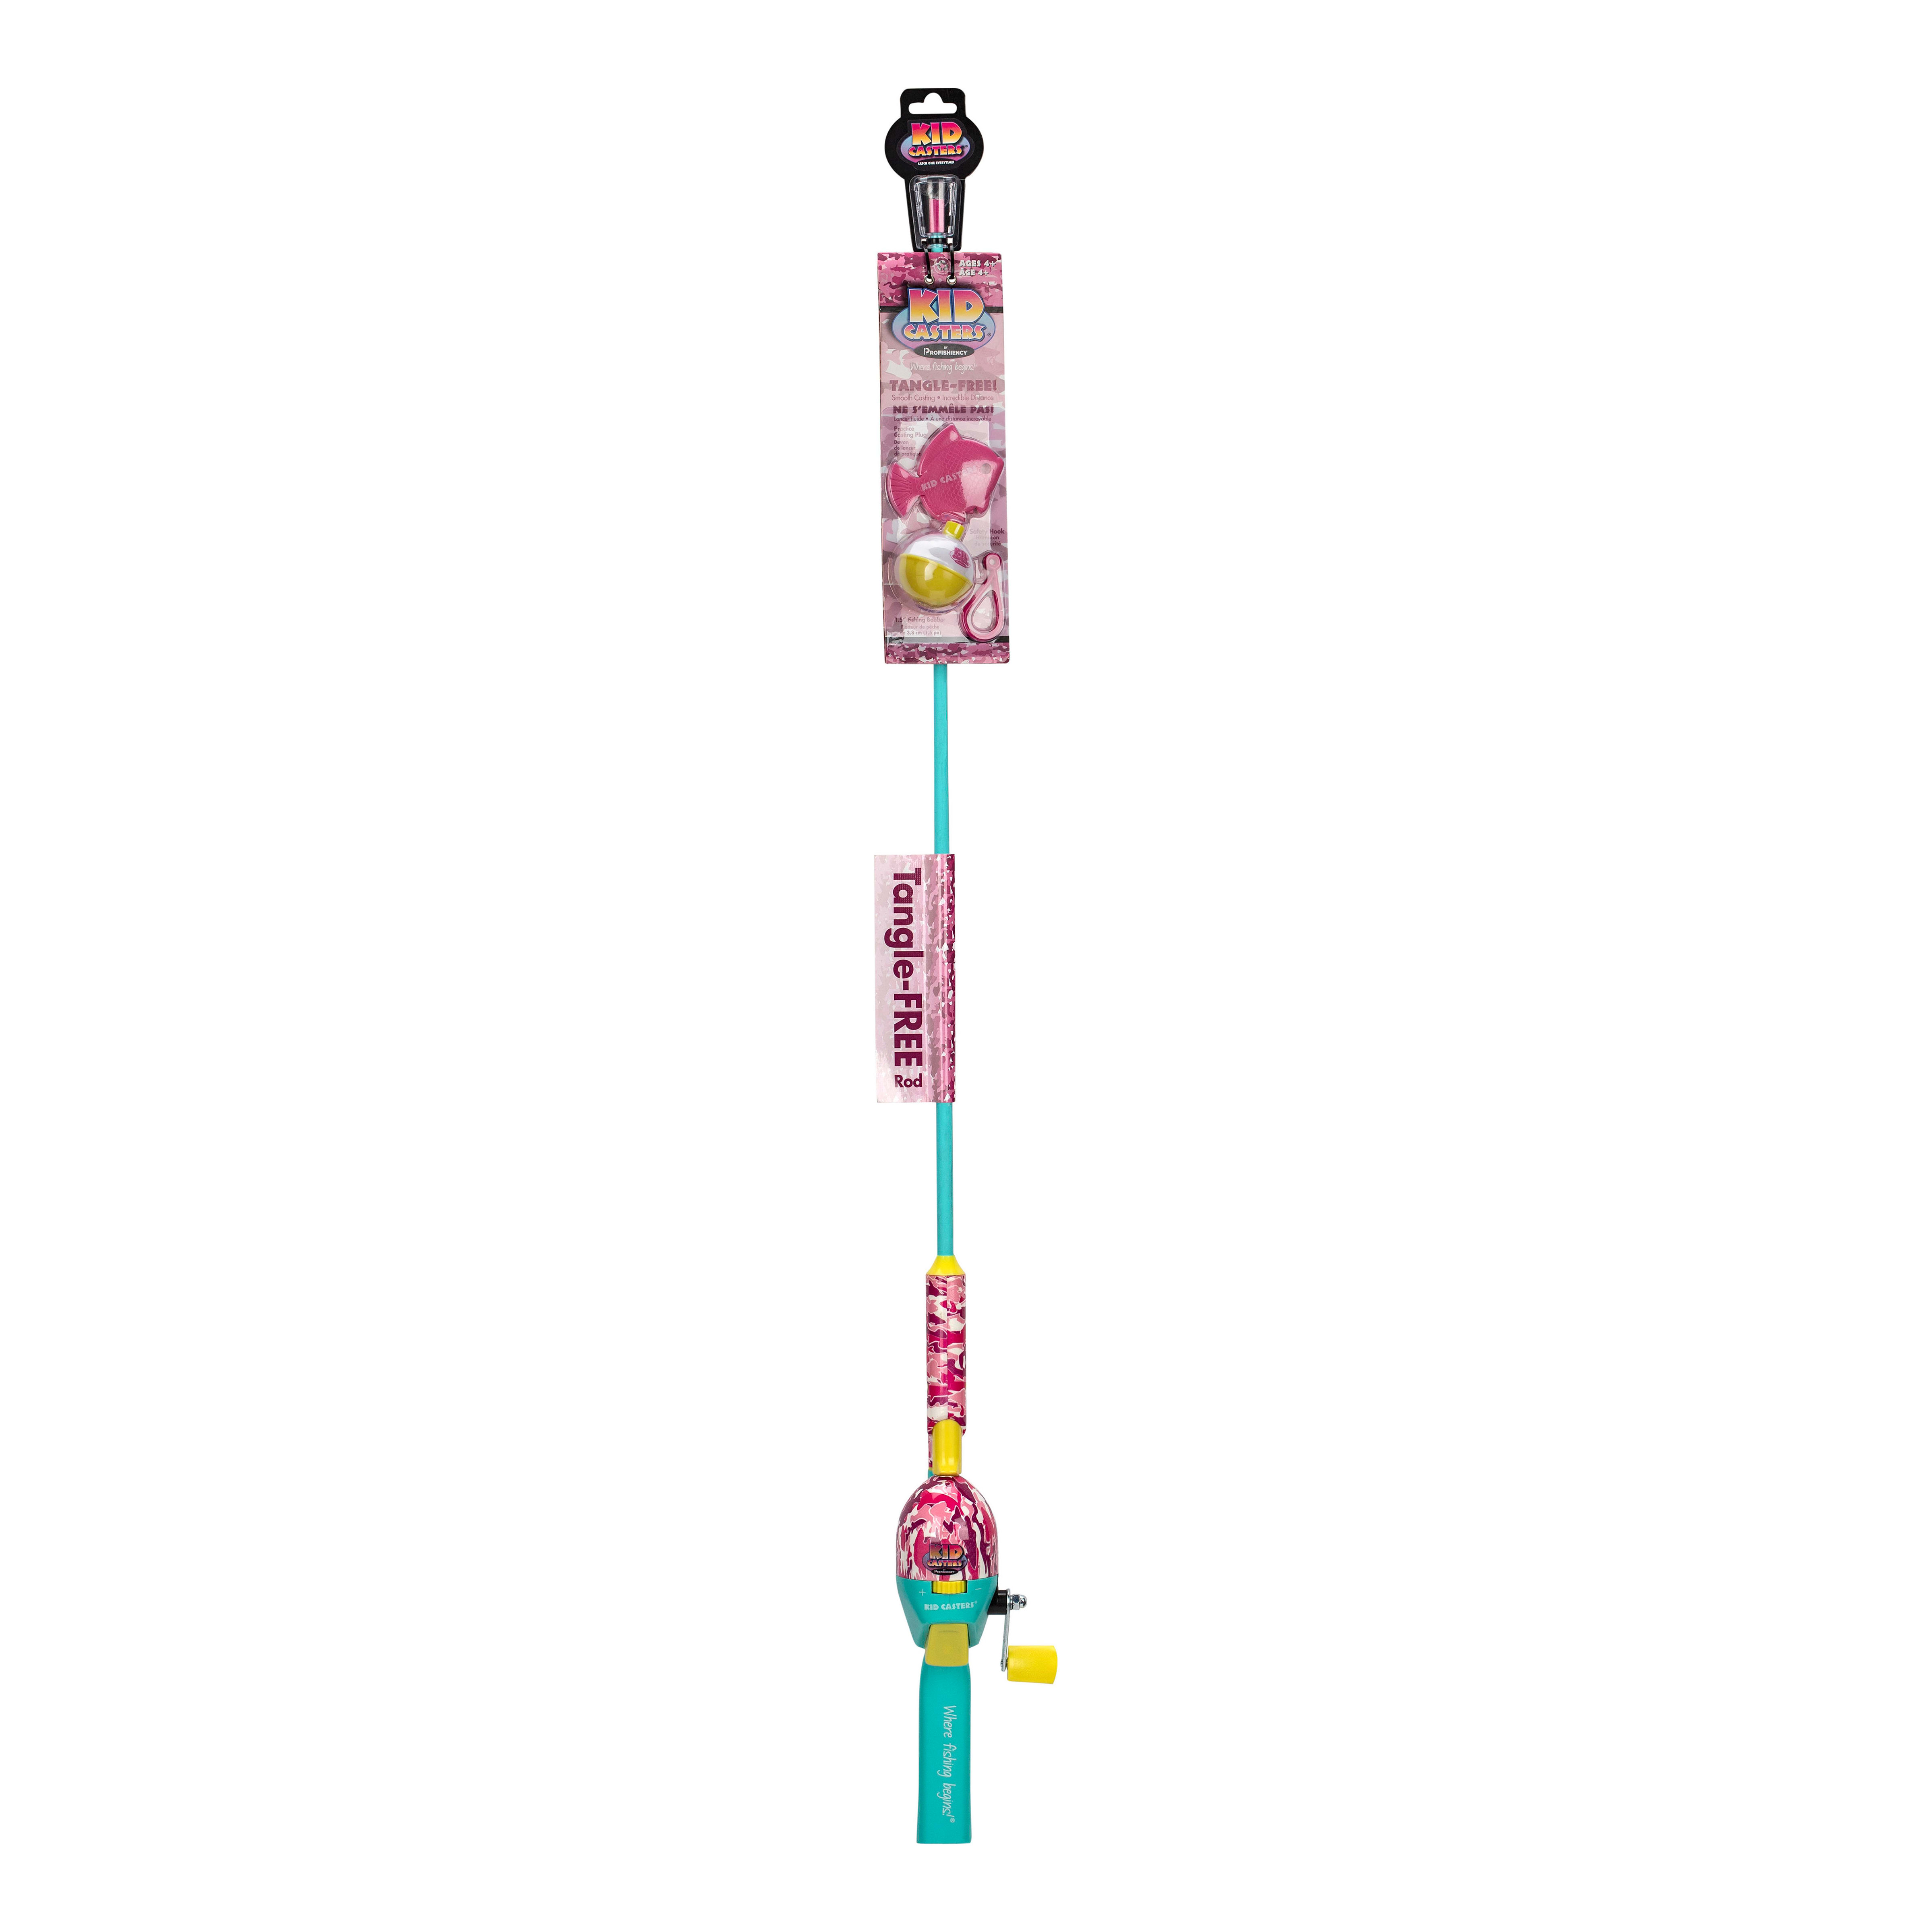 Kid Casters® No Tangle Spincast Kit - Pink Camo